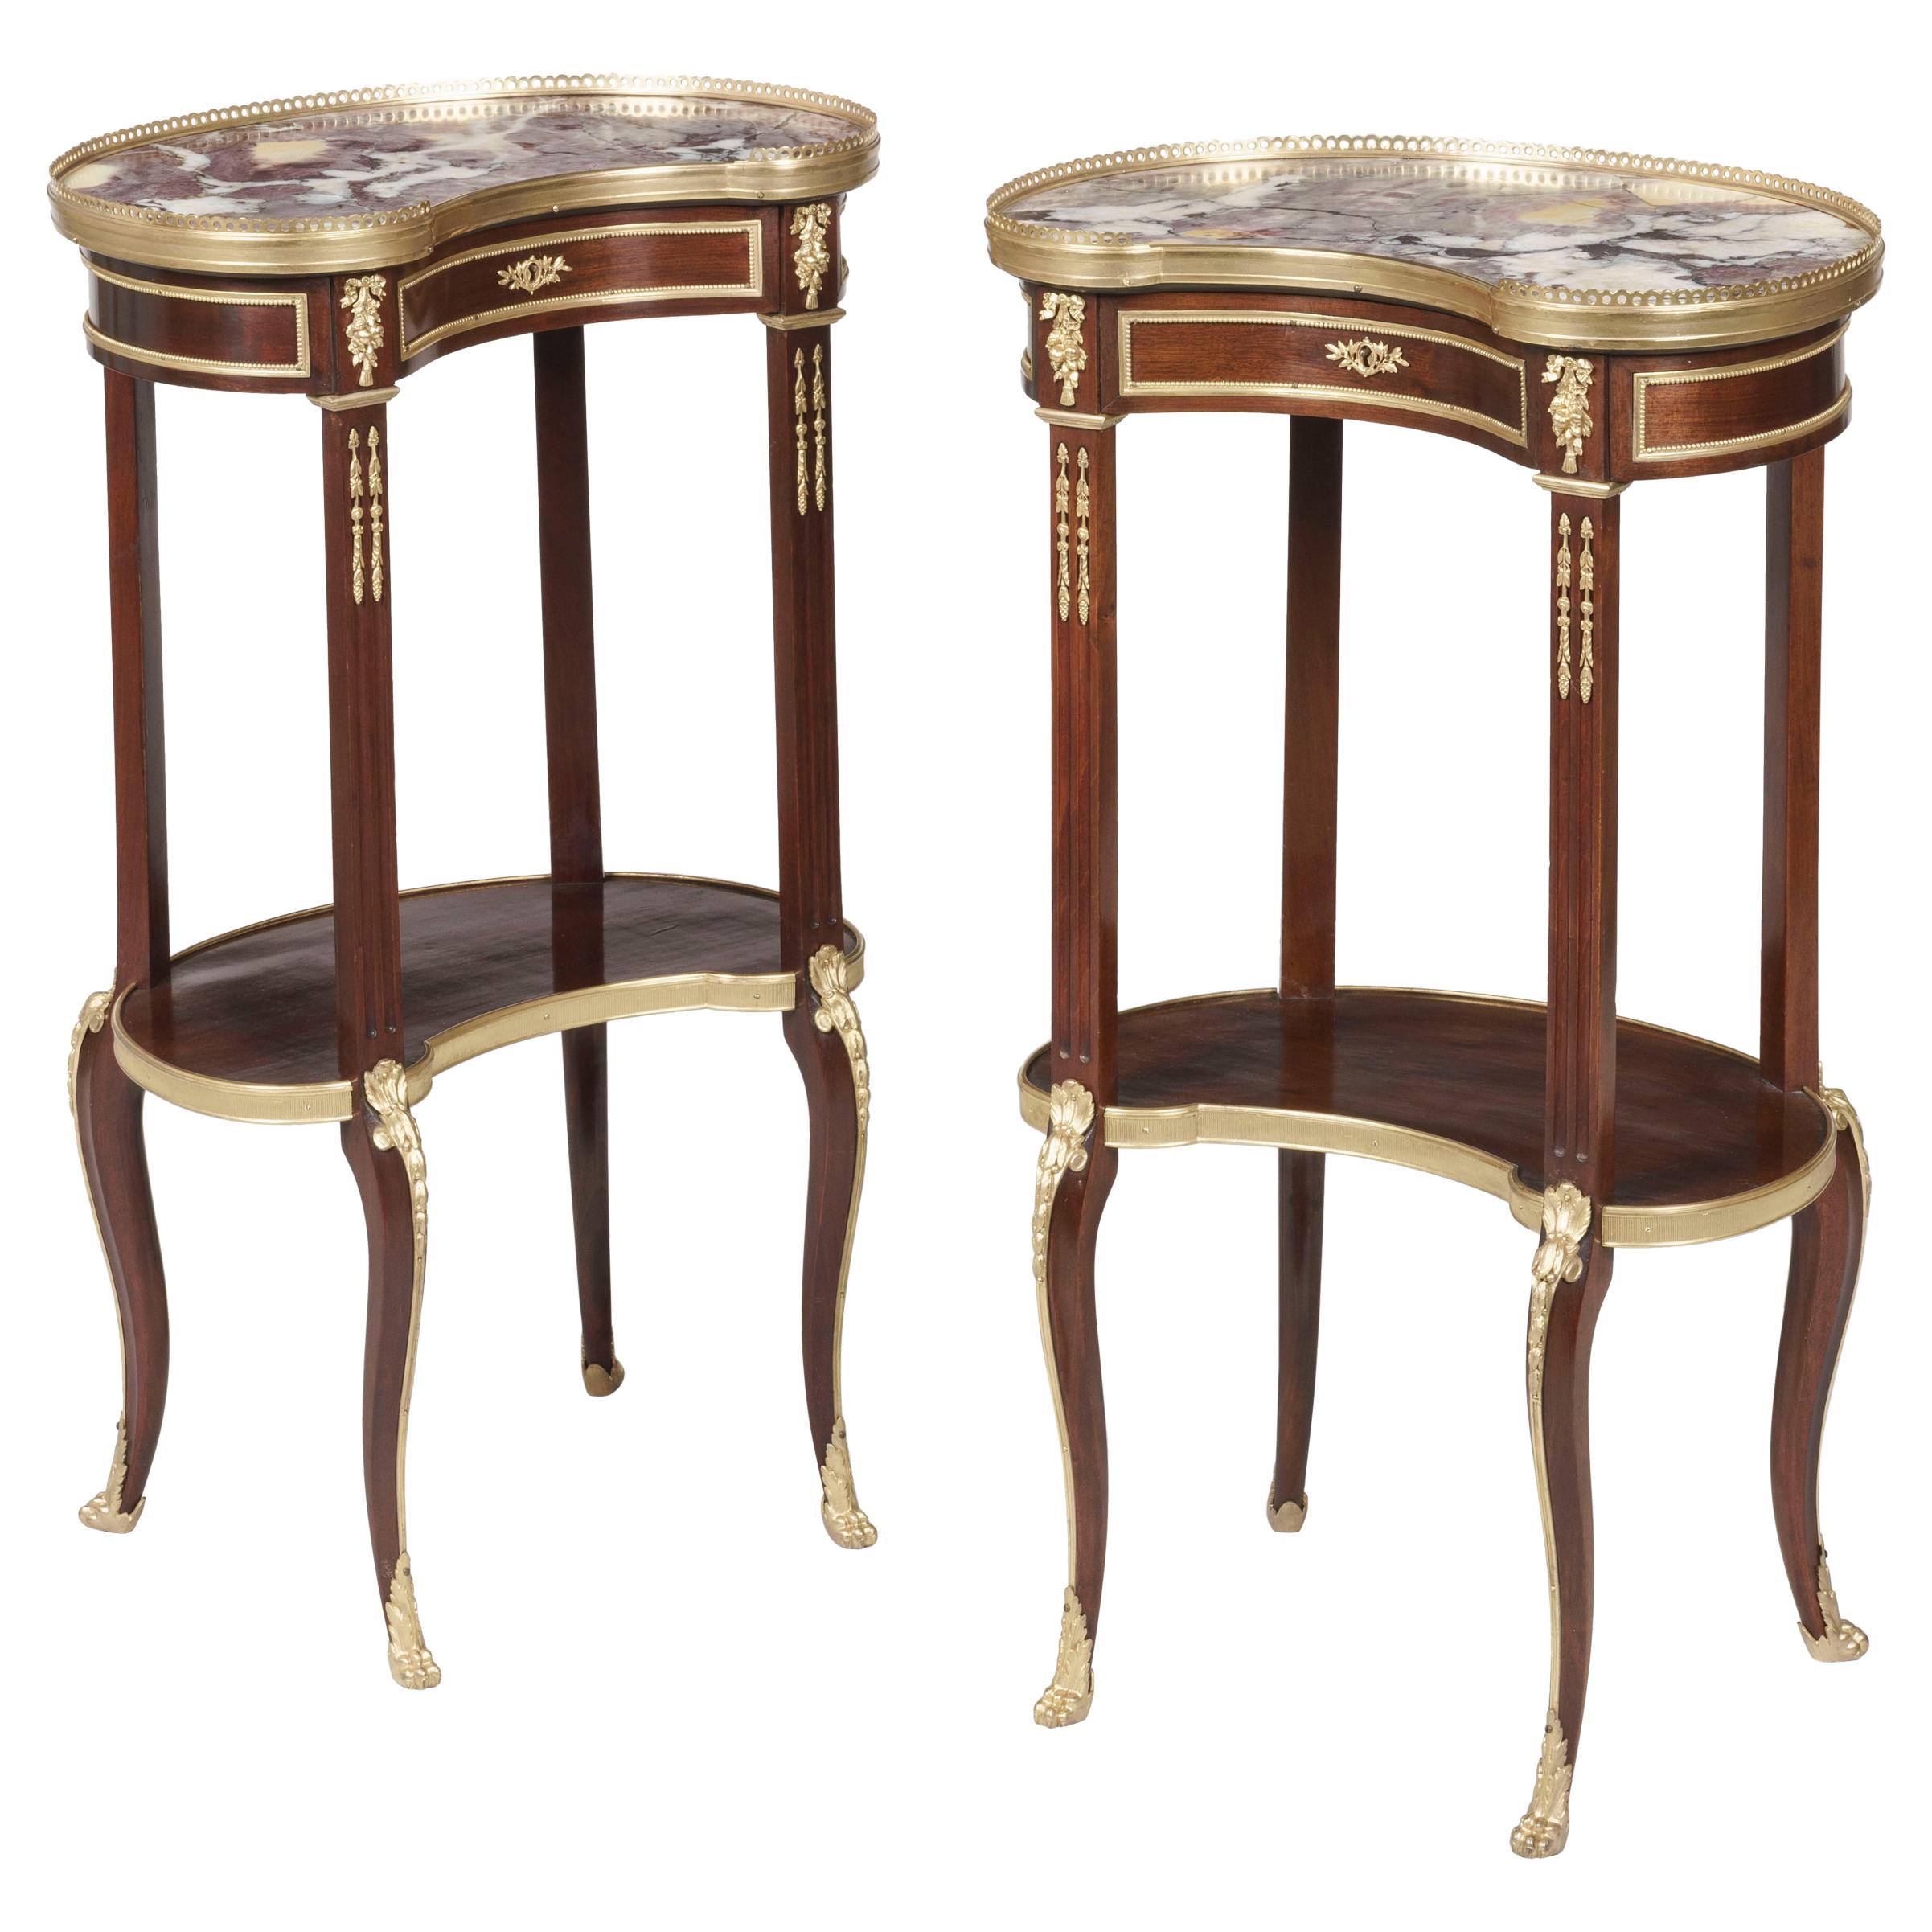 19th Century Pair of French Ormolu-Mounted Kidney-Shaped Occasional Tables